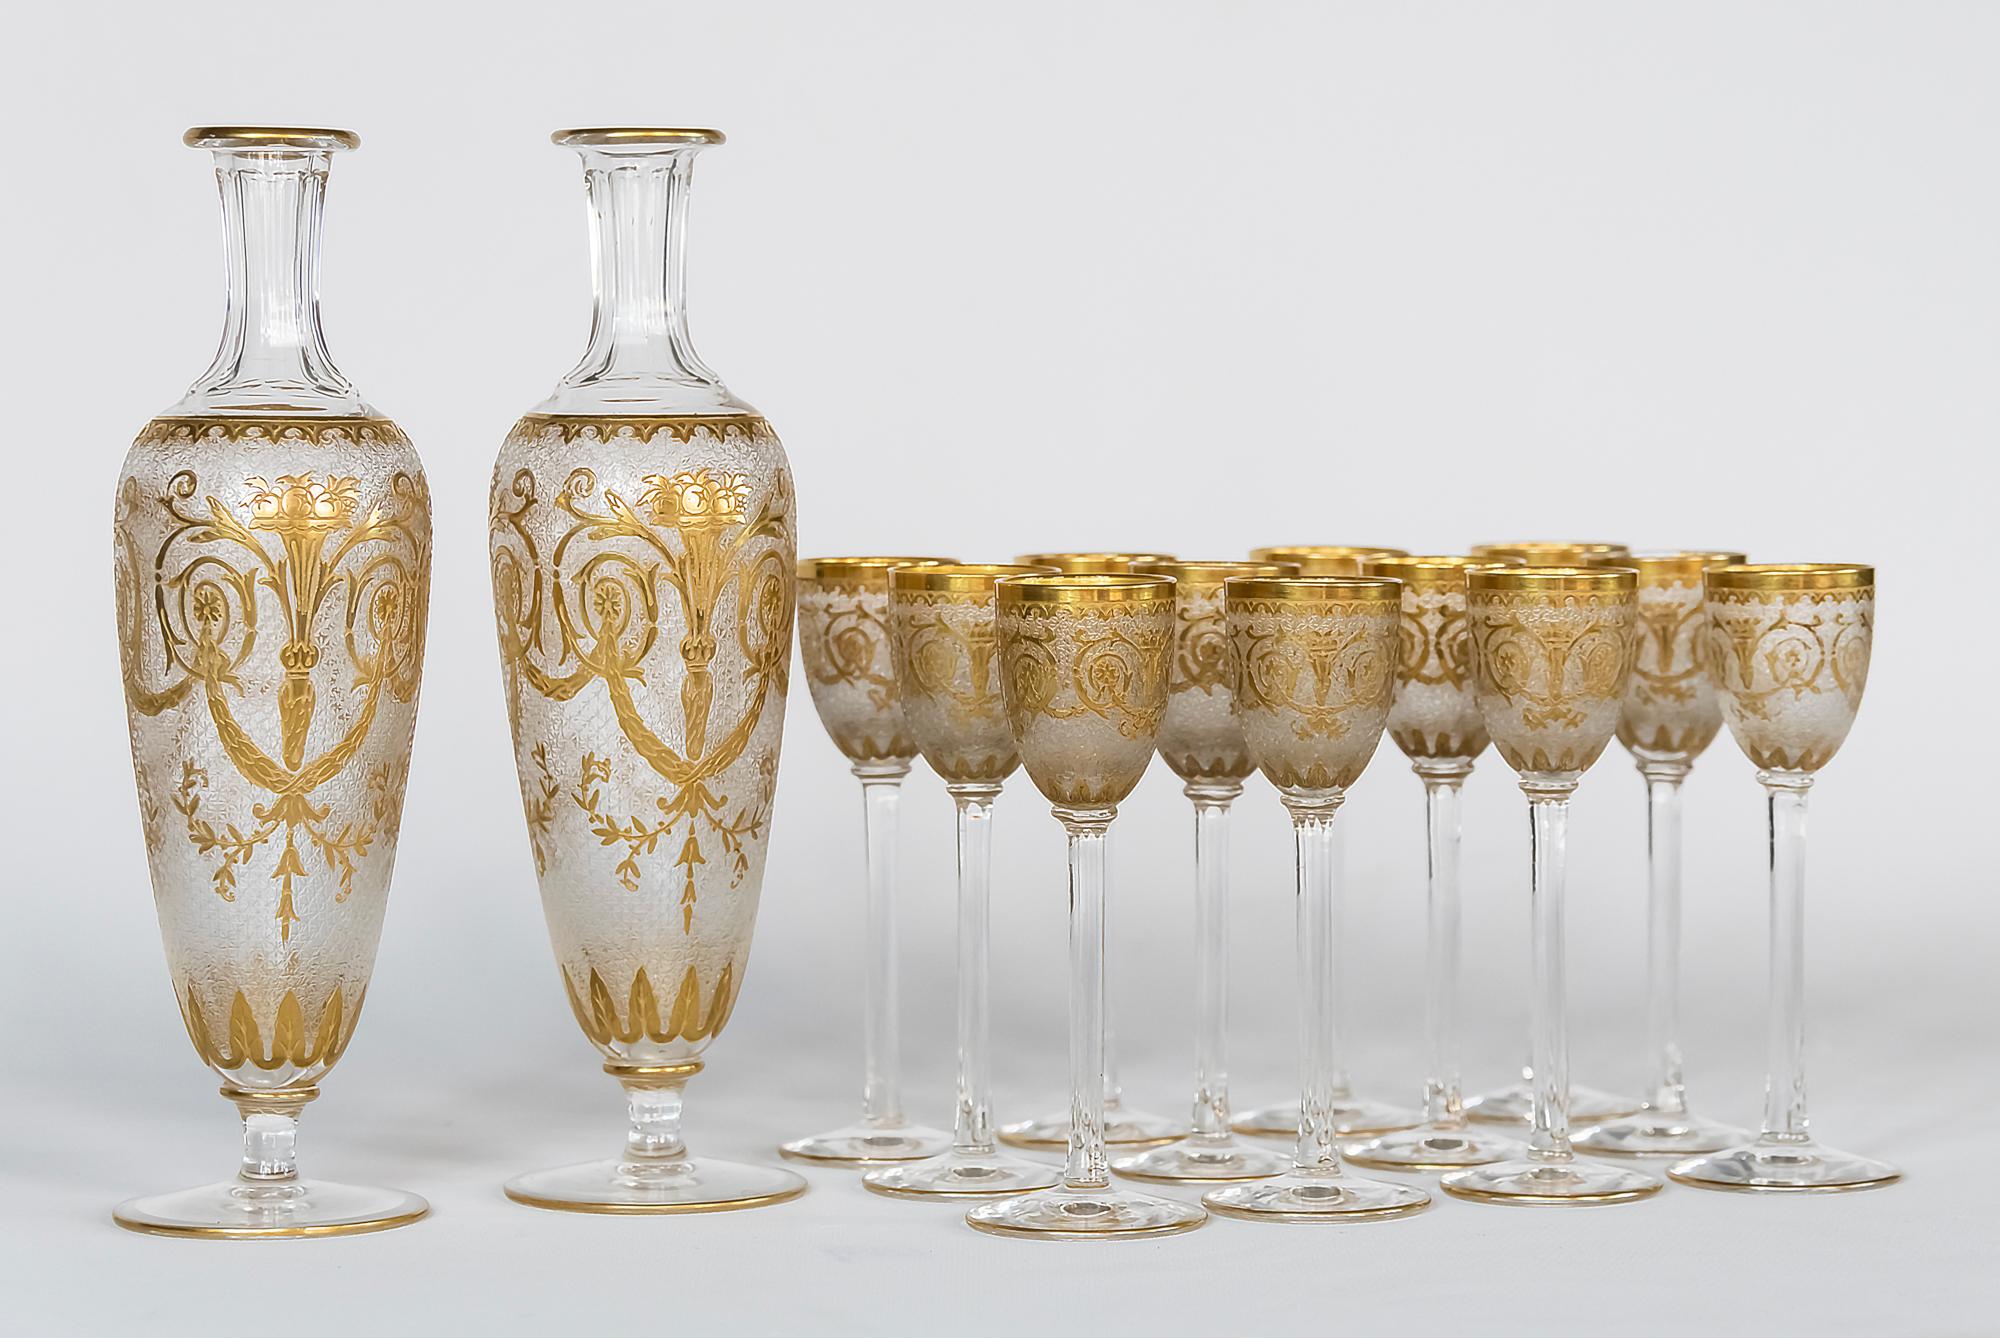 Antique French Saint Louis cut and frosted crystal liqueur set decorated with gilded ornaments.
This set includes 12 pieces of goblets, 2 pieces of decanters (without stoppers).

Very good antique condition. 

 